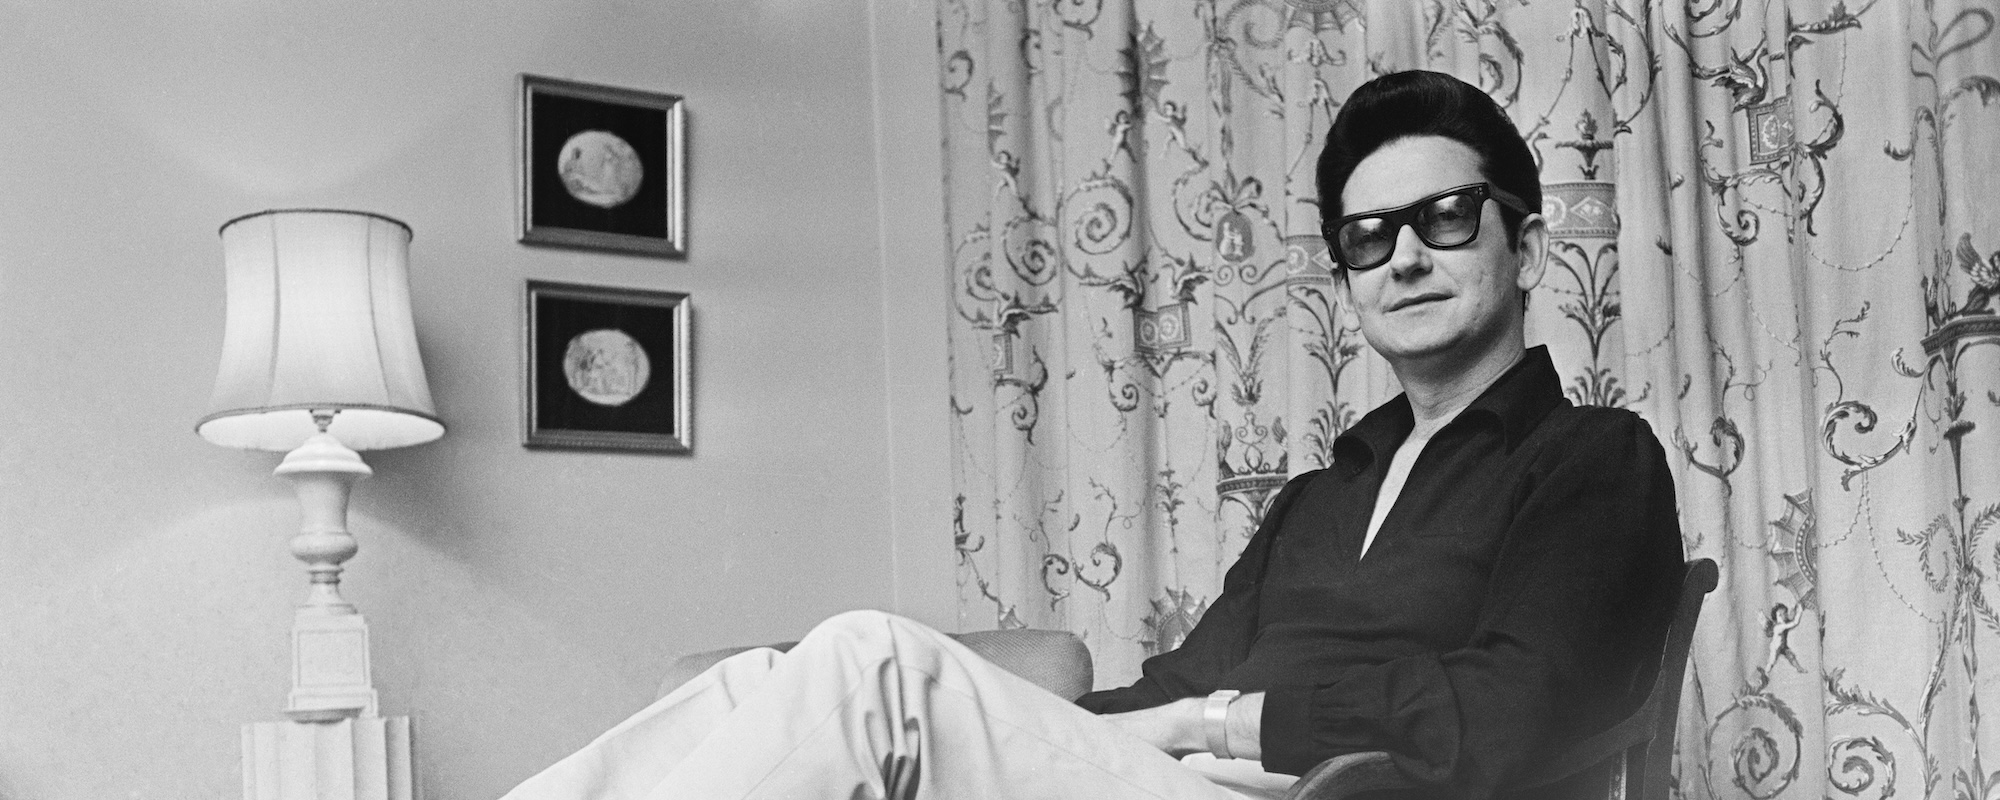 The Story Behind “Only the Lonely,” the Hit Roy Orbison Originally Offered to Elvis Presley and the Everly Brothers